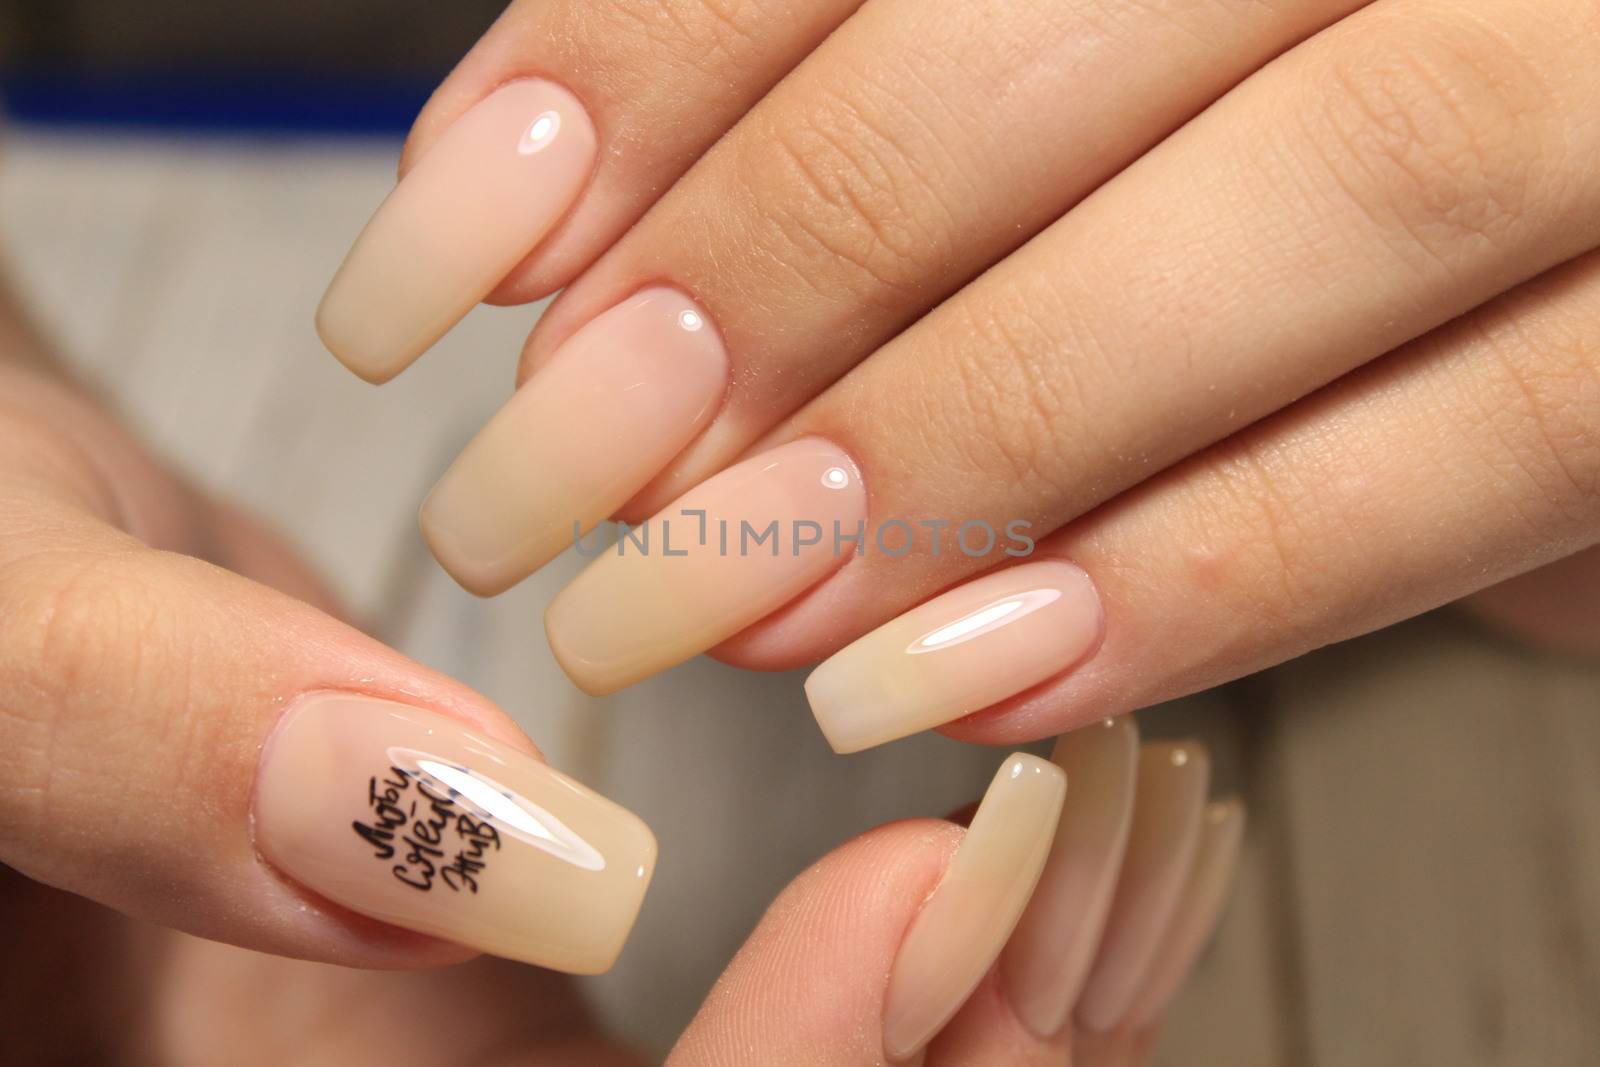 Perfect manicure and natural nails. Attractive modern nail art